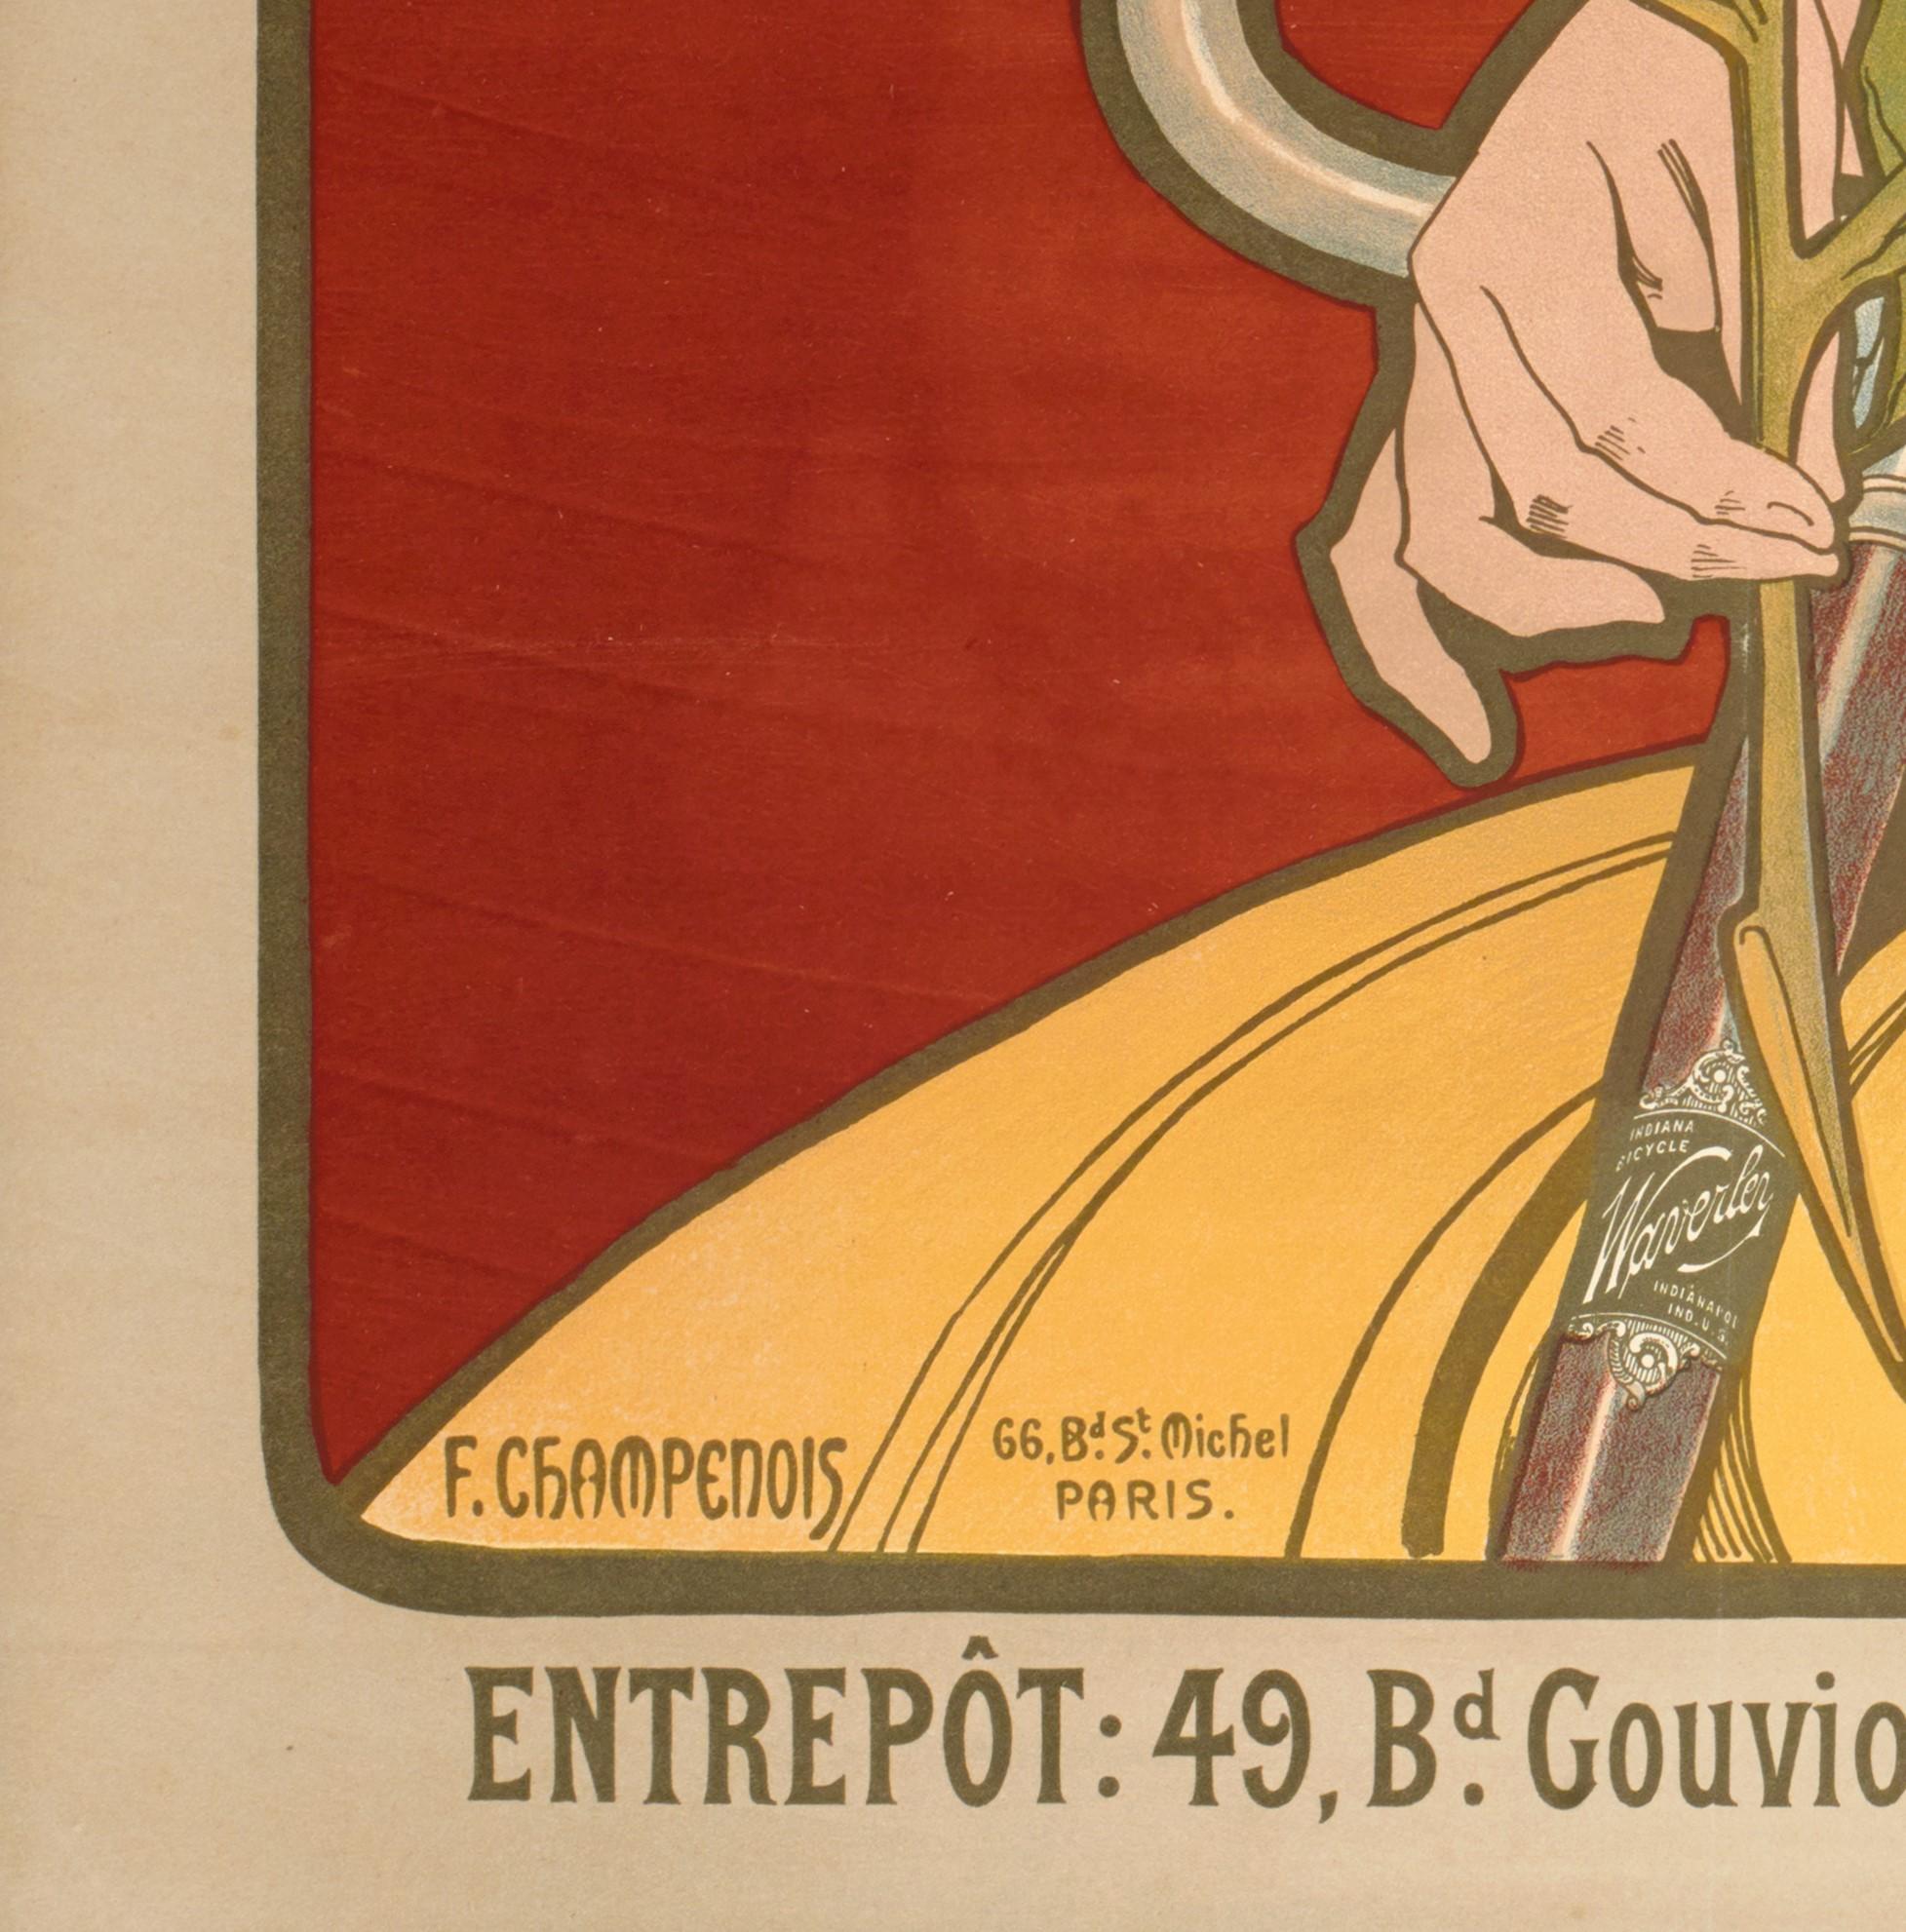 Original Art Nouveau Vintage Poster dating from 1898 by Alphonse Mucha.

Artist: Alphonse Mucha (1860-1939)
Title: Waverley Cycles
Date: 1898
Size (w x h): 33.9 x 42.9 in / 86 x 109 cm
Printer: F. Champenois, 66 Bd St Michel, Paris.
Materials